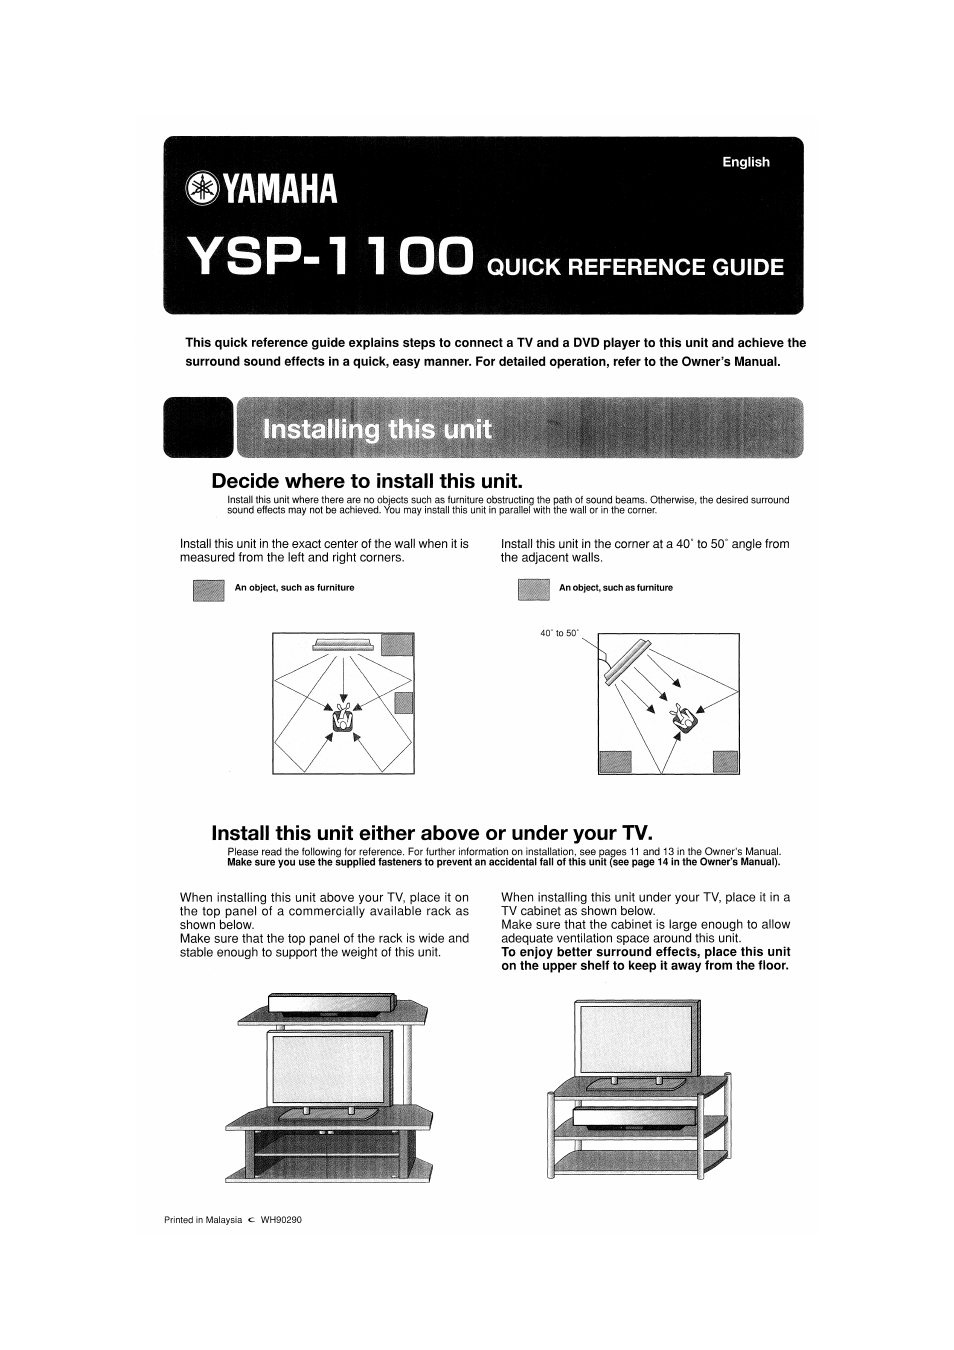 Ysp-noo, Quick reference guide, Decide where to install this unit | Install this unit either above or under your tv | Yamaha YSP-1100 User Manual | Page 101 / 104